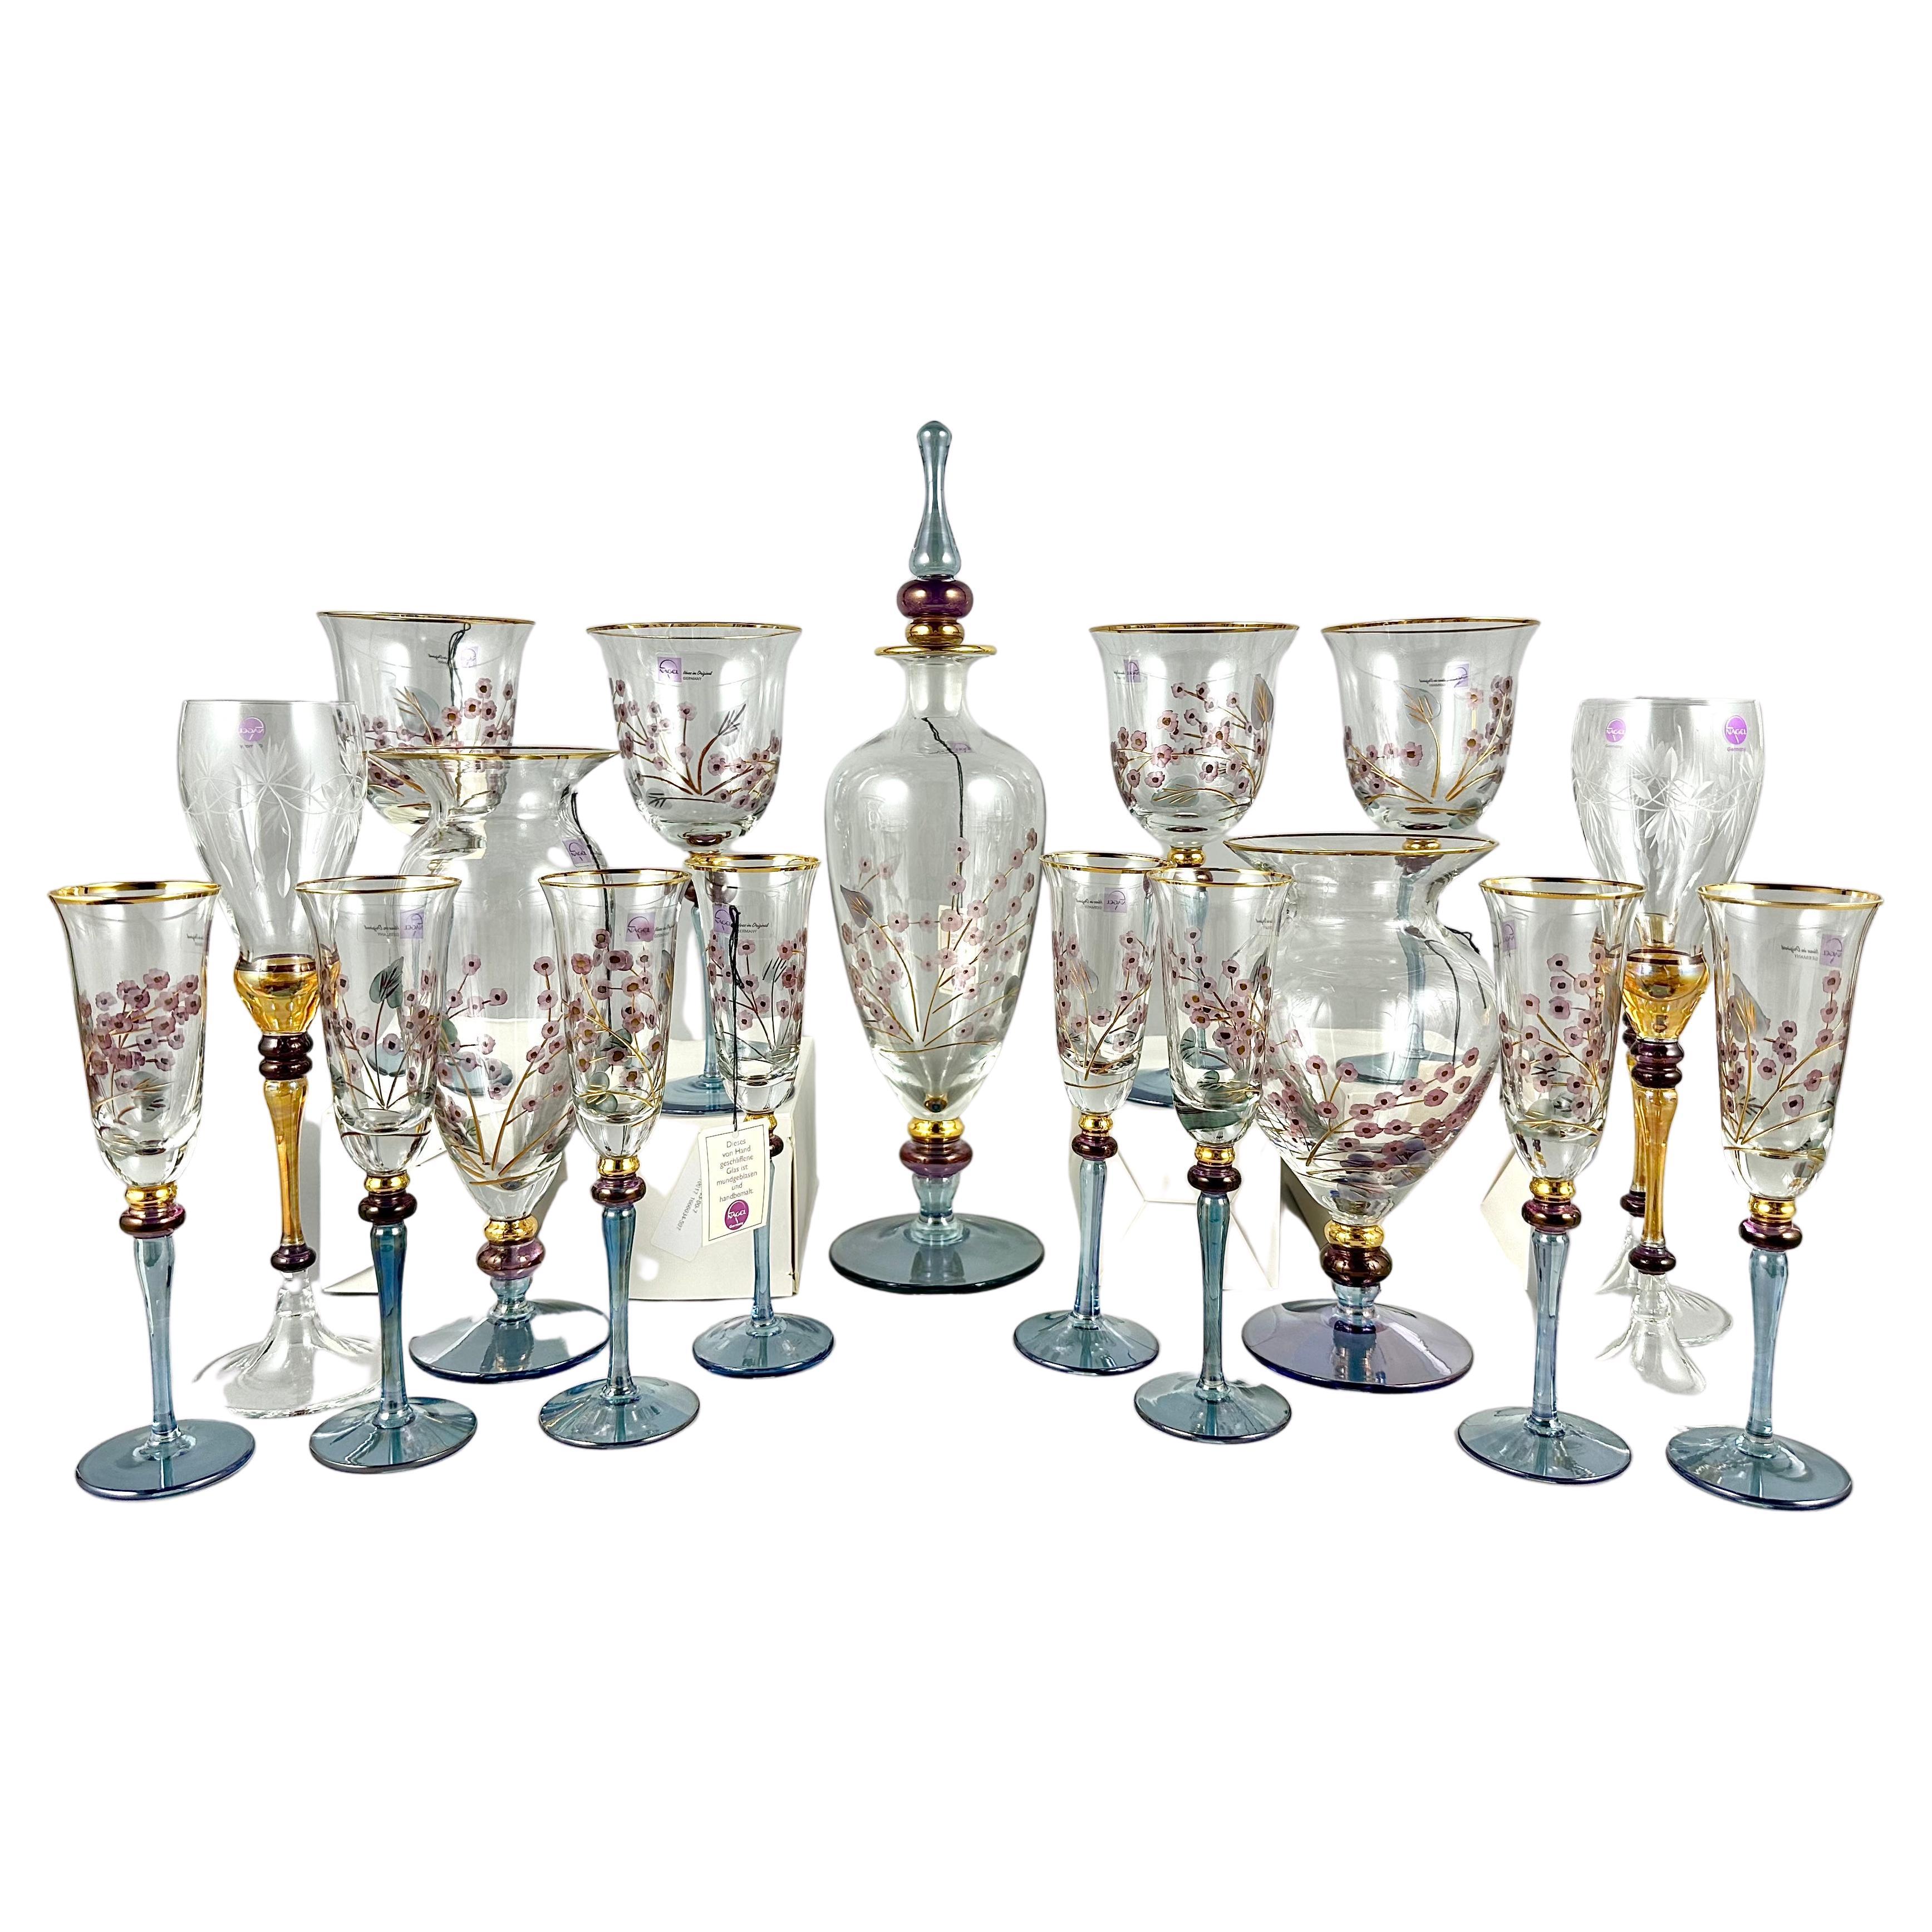 Unique Barware Set Of Vintage Wine Champagne Glasses Vases and Decanter by Nagel For Sale